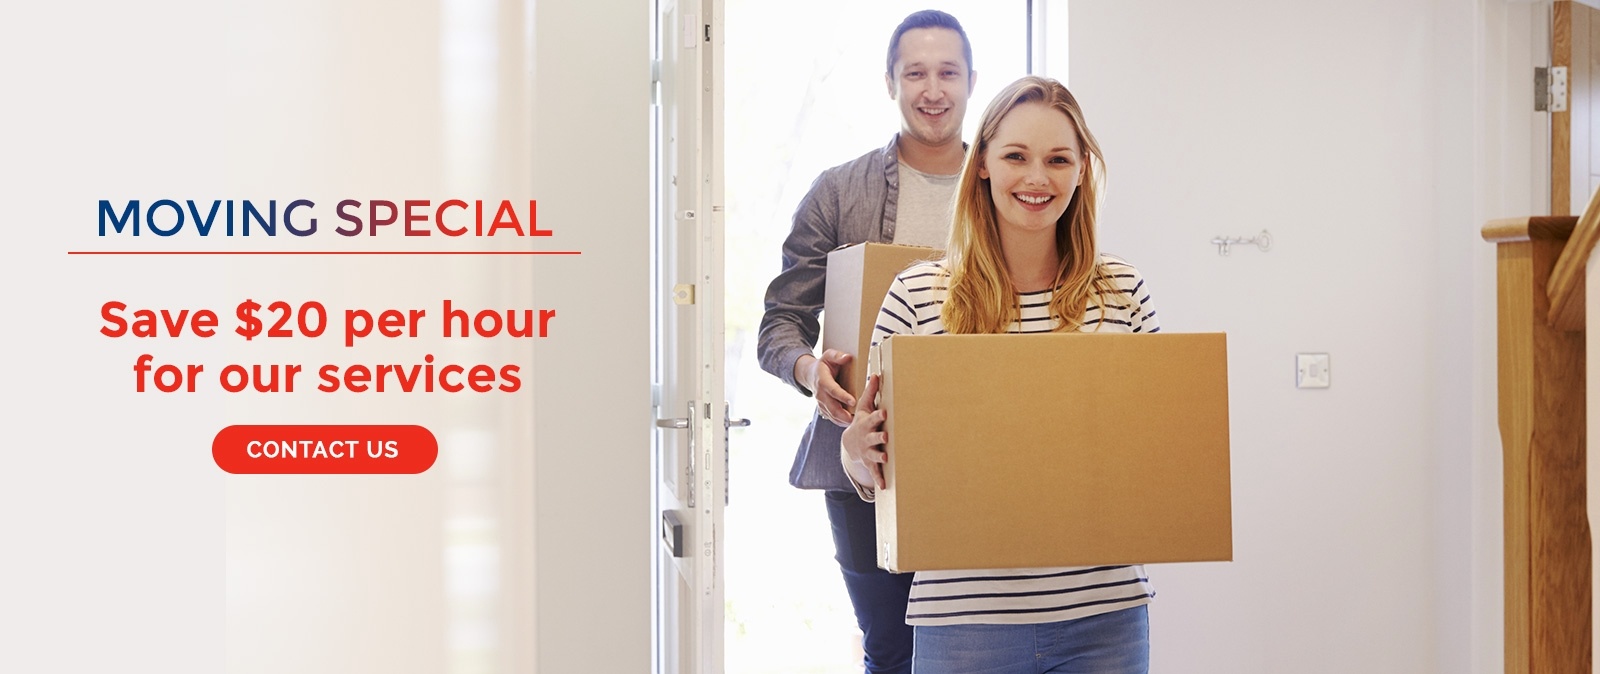 The Easy Move is London's Best and Reliable Moving Company without Sacrificing Service or Quality